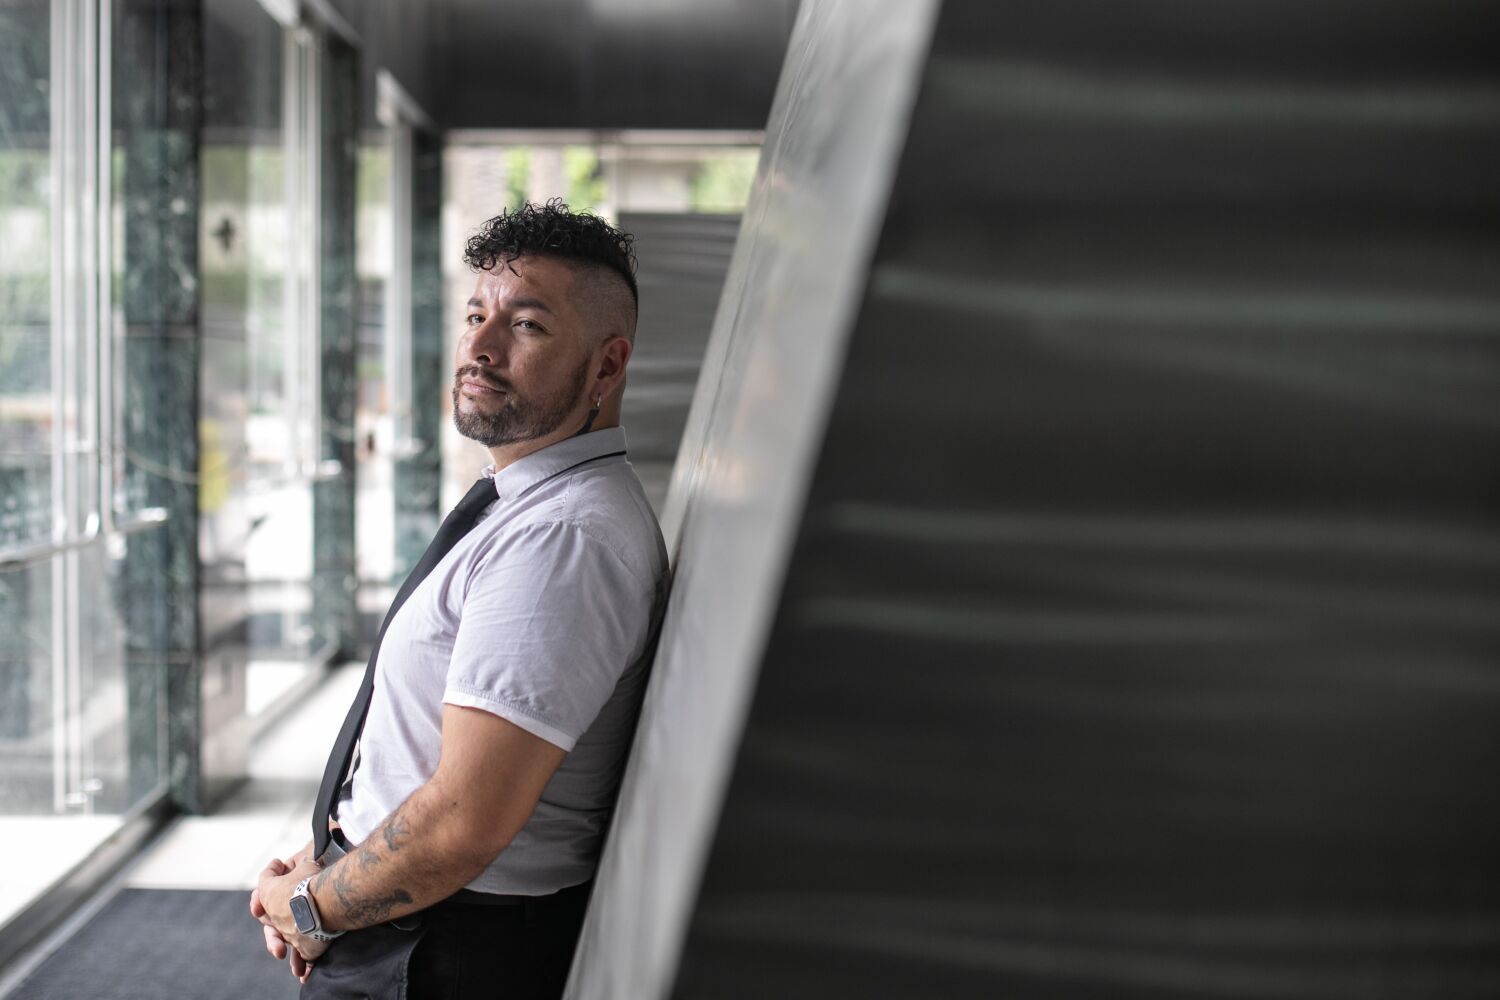 10 years ago, this immigrant didn't qualify for DACA protection. Now, he's an entrepreneur